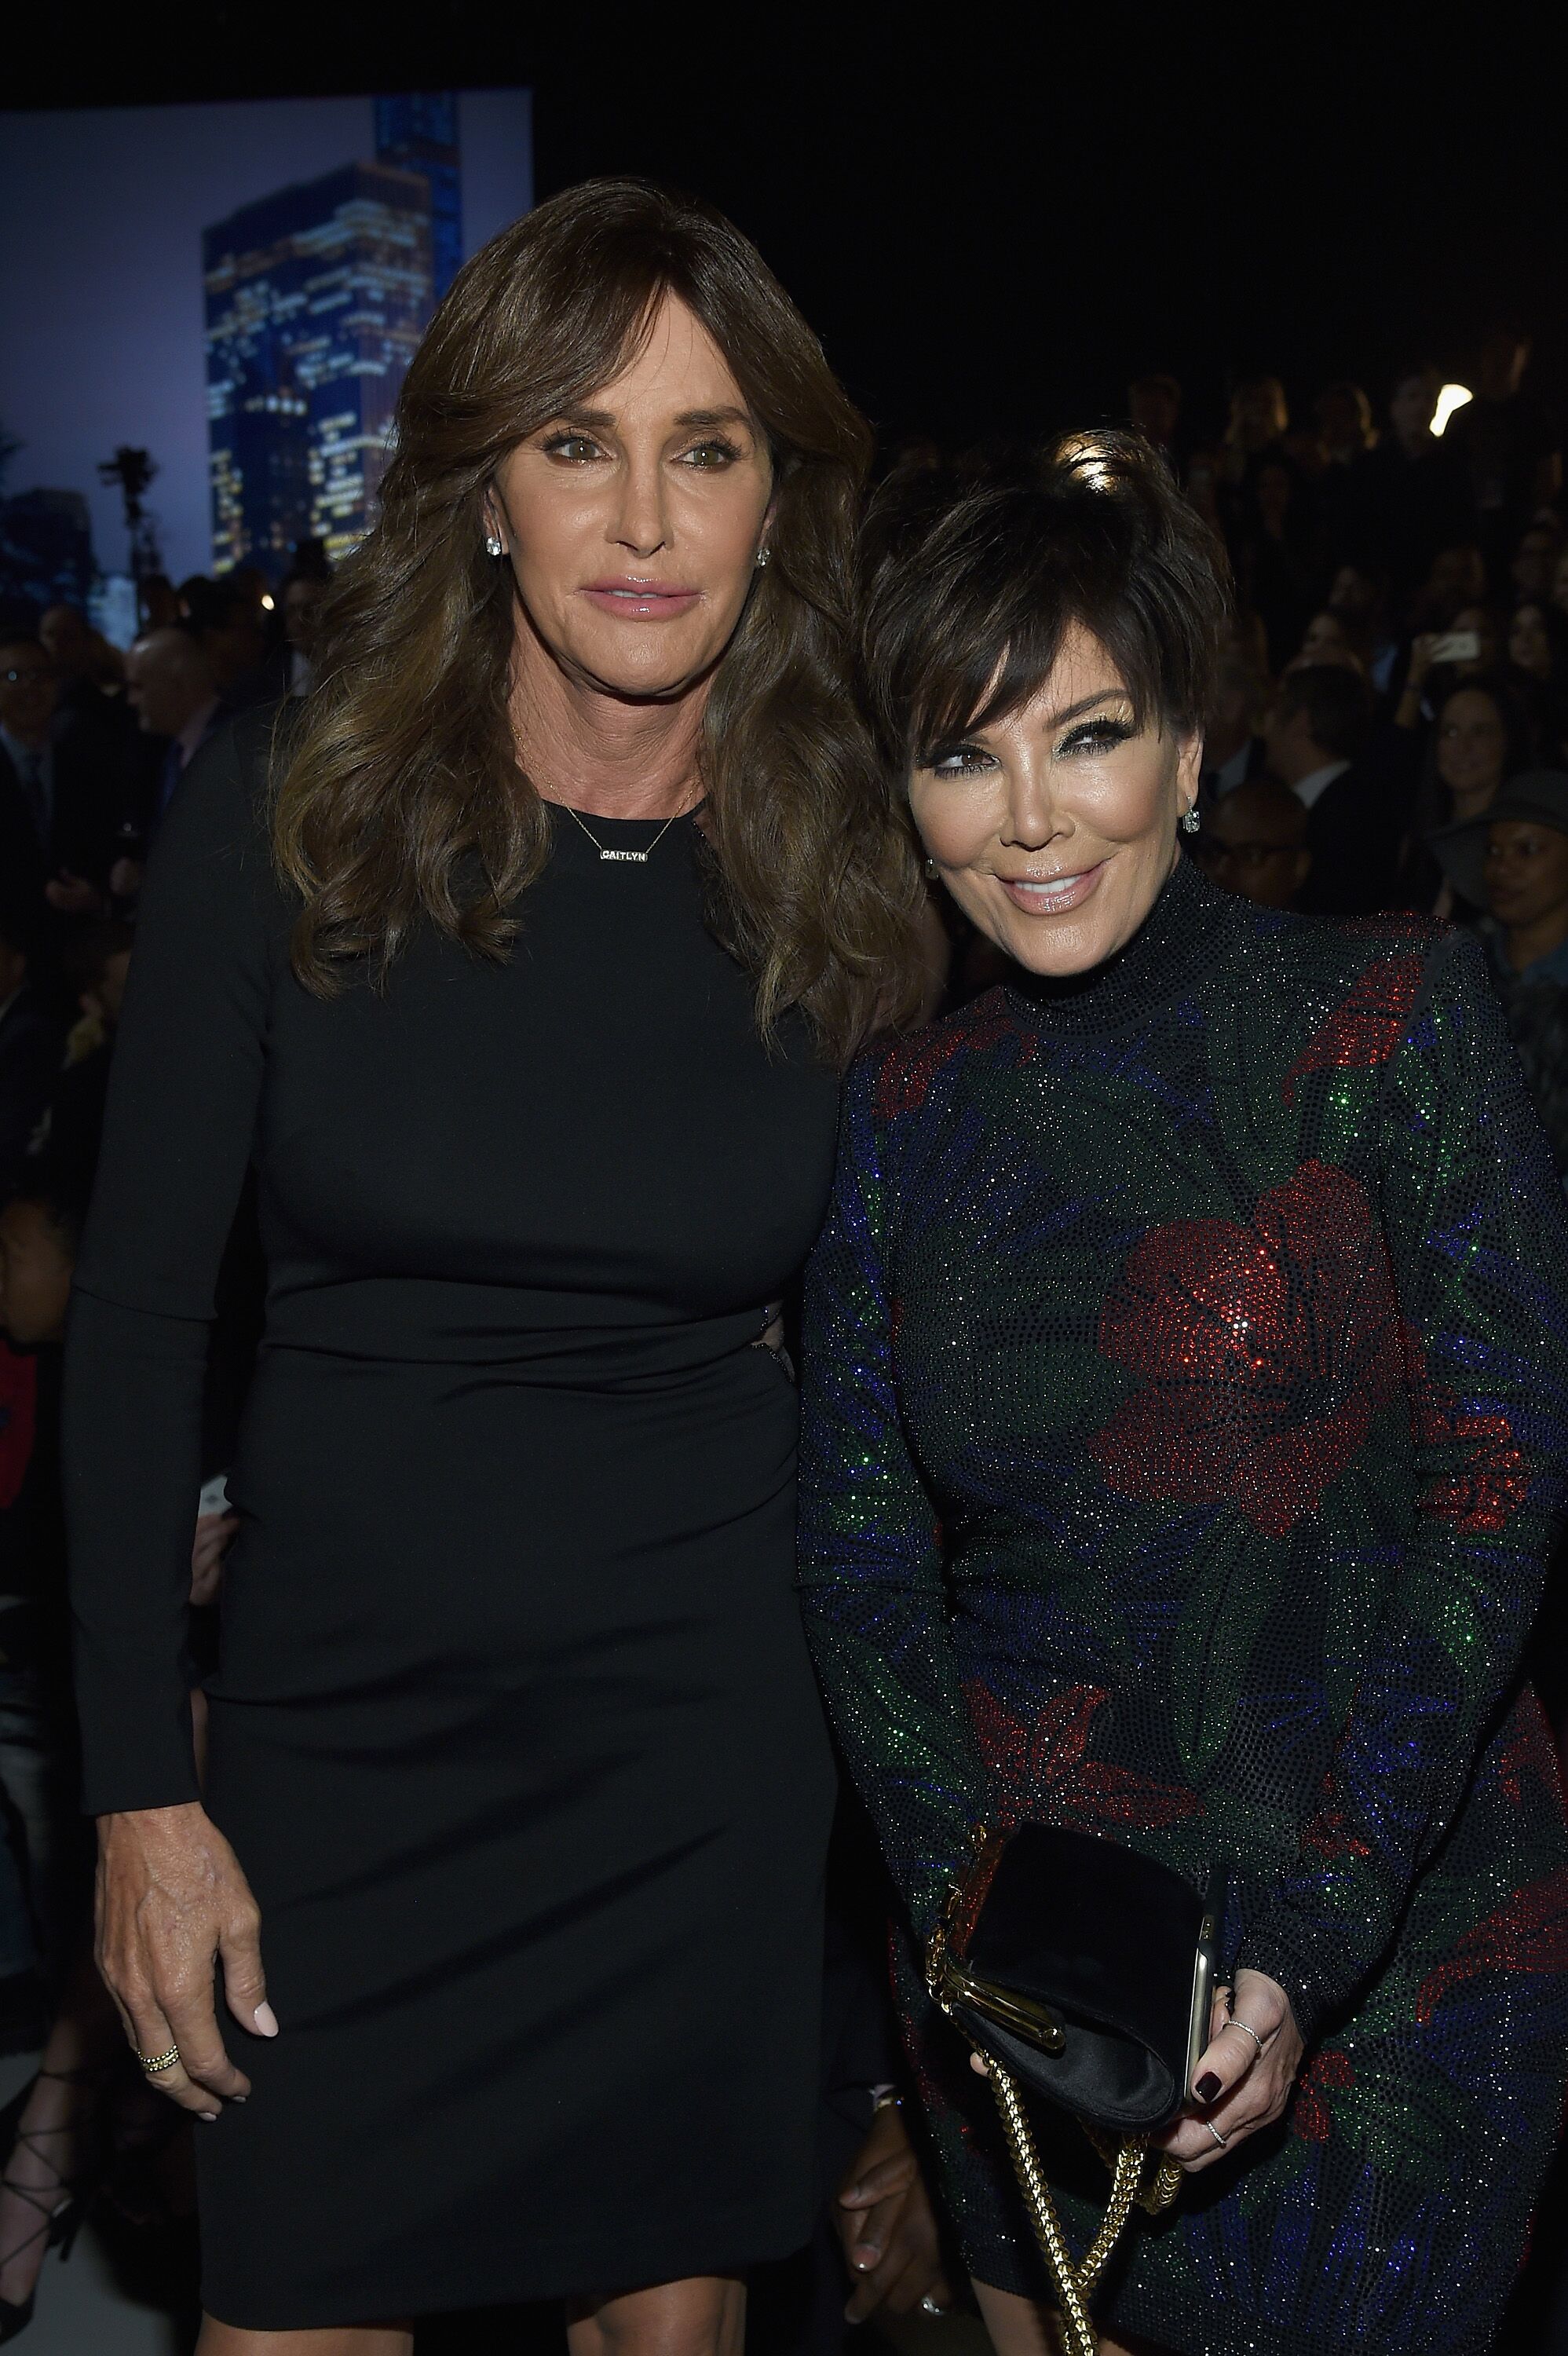 Caitlyn Jenner and Kris Jenner attend the 2015 Victoria's Secret Fashion Show | Source: Getty Images